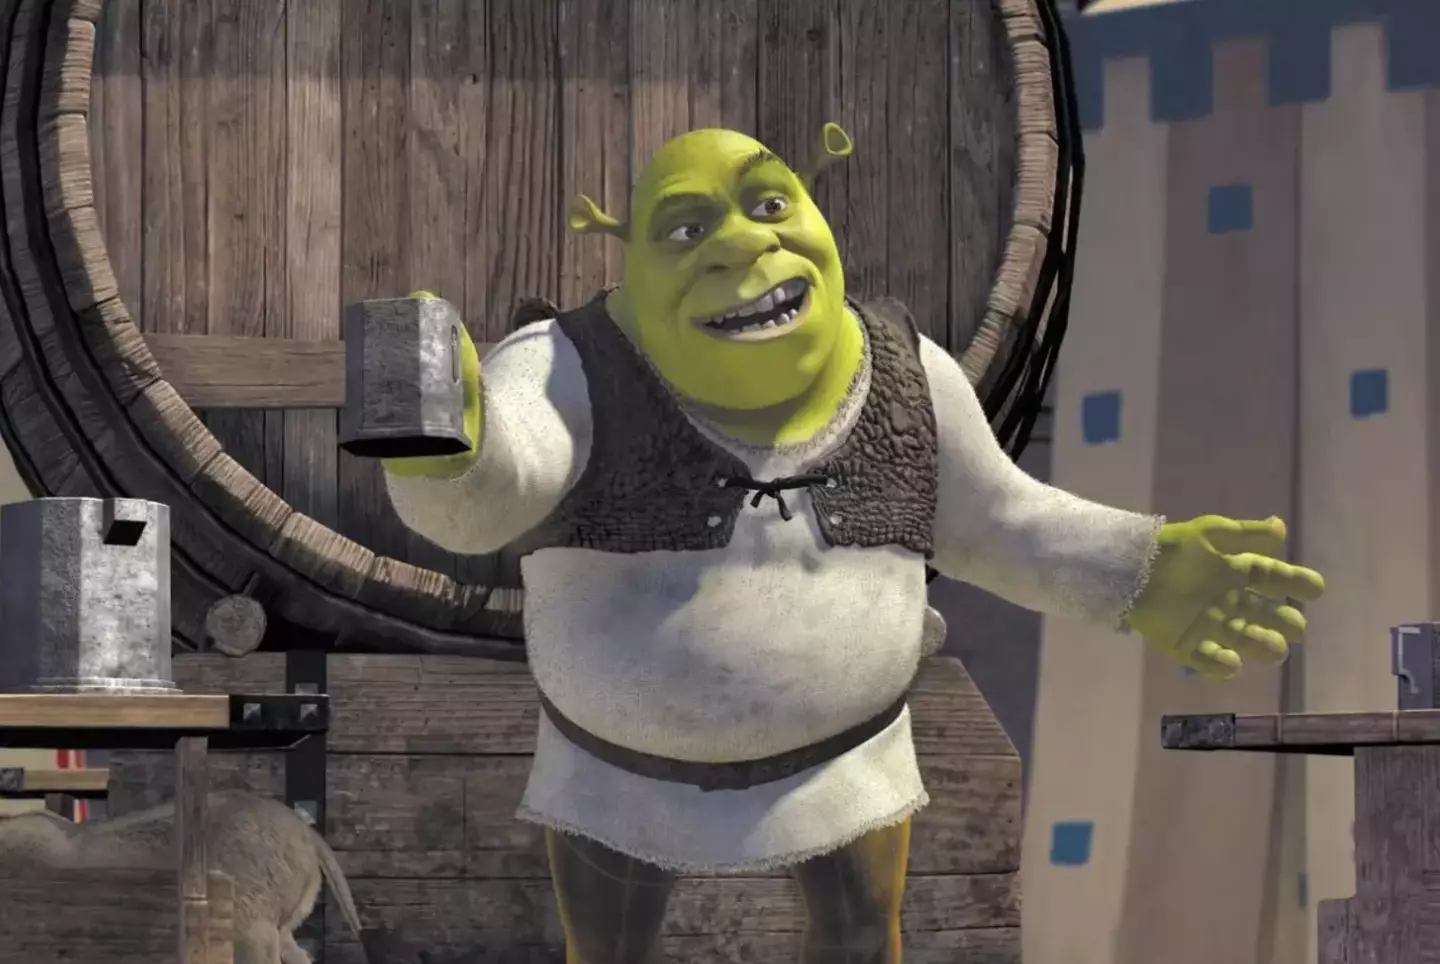 Shrek wouldn't be the same without its original cast.